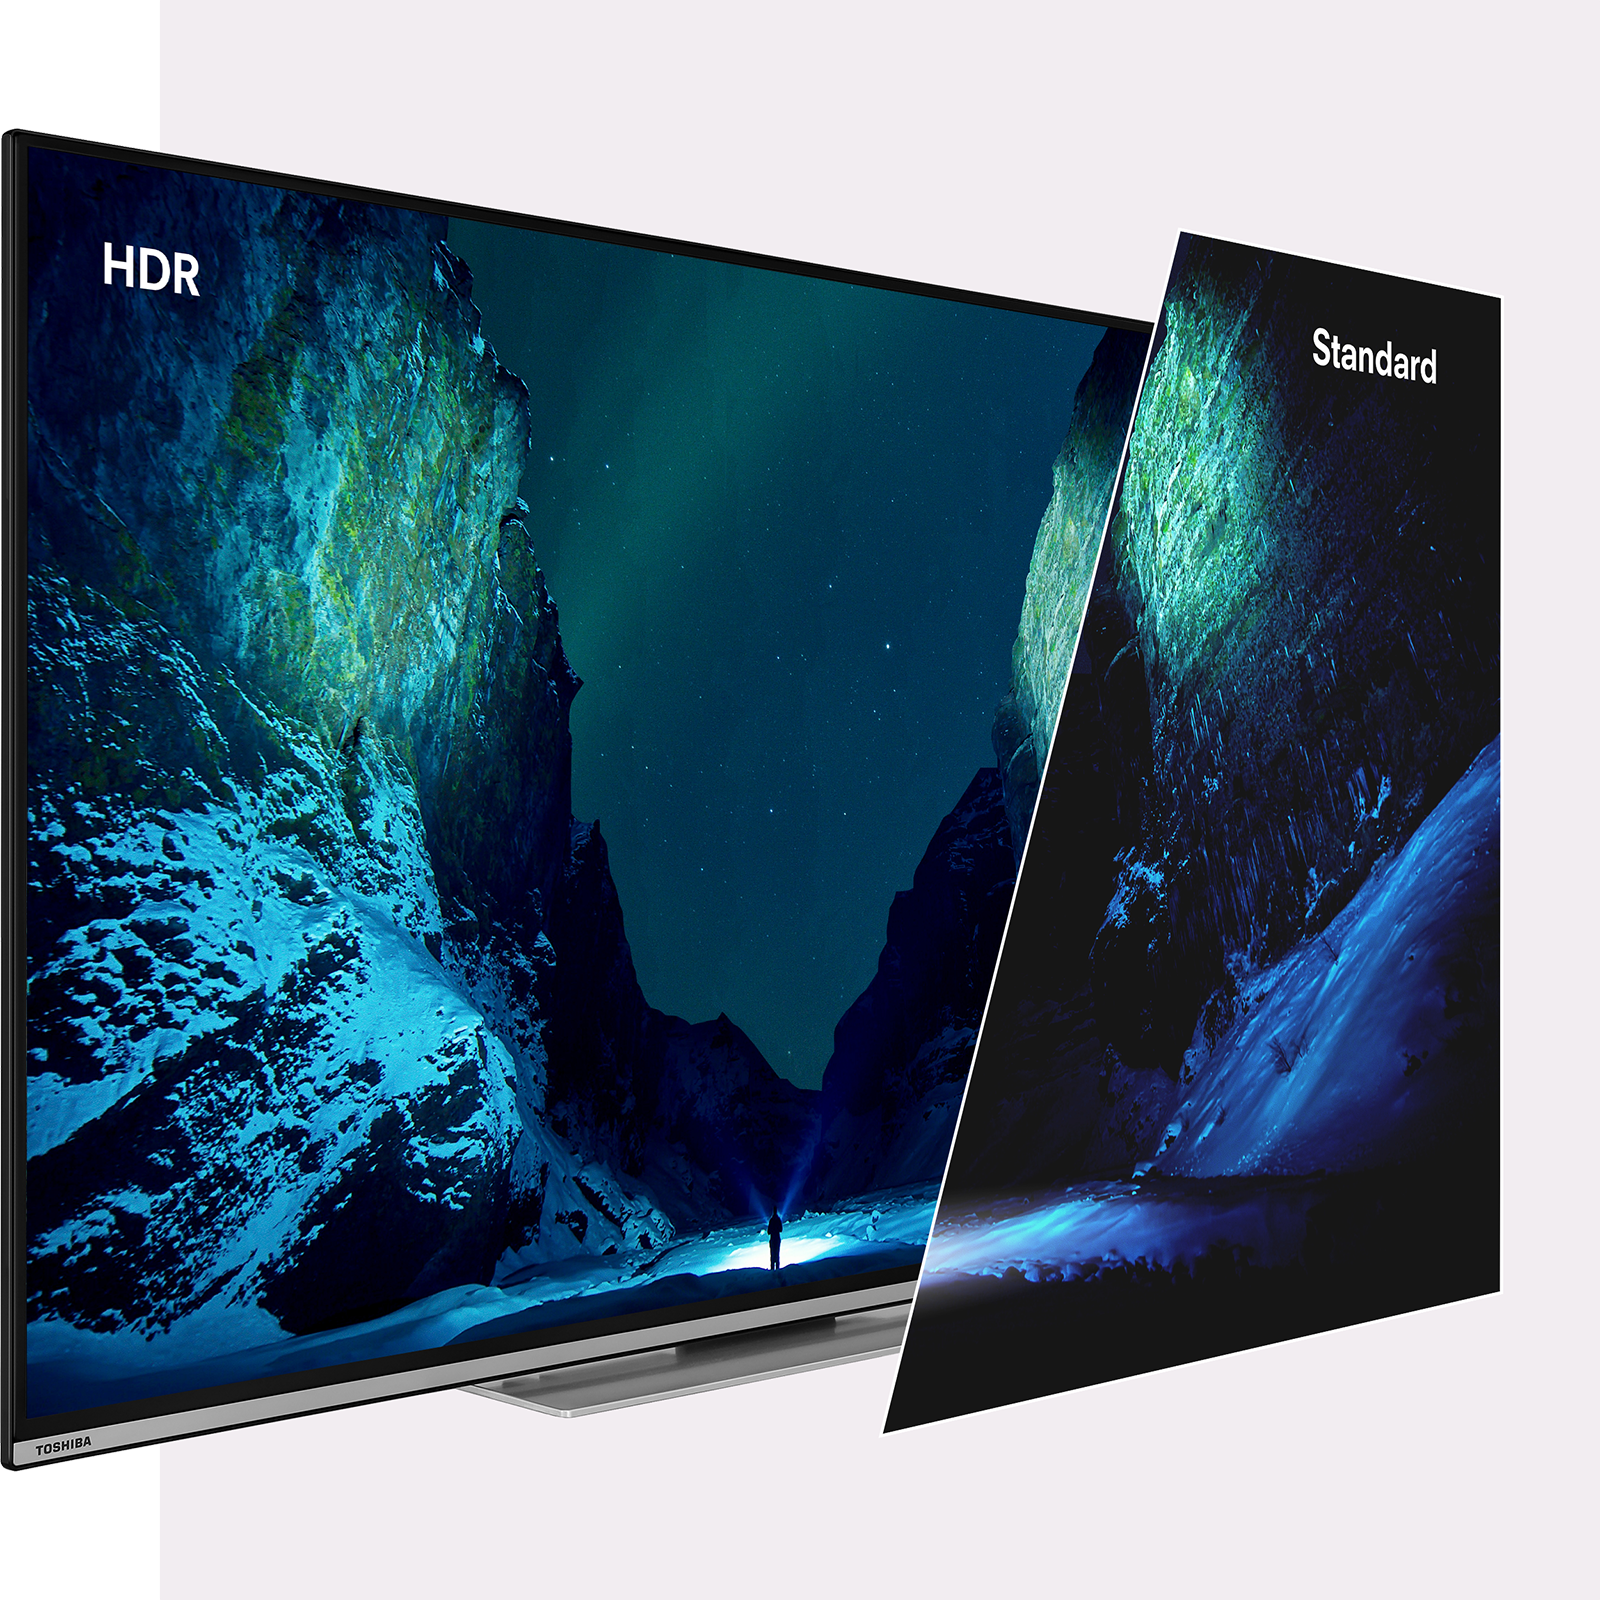 <ul class="a-unordered-list a-vertical a-spacing-mini"> <li><span class="a-list-item">Breathtaking images - Experience content in modern 4K UHD resolution. The TV also supports Dolby Vision HDR, TRU Resolution and Micro Dimming and thus delivers particularly high-contrast images with a natural colour and impressive detail sharpness. Your TV experience will be even more realistic.</span></li> <li><span class="a-list-item">Limitless entertainment - Let yourself be inspired by the diverse range of Android Smart TV. Whether serial marathon, movie night or thrilling sporting events – you have access to countless apps and media libraries such as Prime Video, Netflix, DAZN, Disney+, YouTube, Twitch, ARD, ZDF and much more. (If using streaming services, additional subscription costs may be applied).</span></li> <li><span class="a-list-item">Smart control - Easily control the smart TV with your voice via Google Assistant (an additional smart speaker is not required). A simple "OK Google" is enough to change station, adjust volume, open apps and much more. is a breeze. You can also easily play media from your mobile devices on the TV via Google Chromecast.</span></li> <li><span class="a-list-item">Versatile possibilities – Numerous connections such as 3 x HDMI (CEC + ARC), 2 x USB with media player as well as WLAN & Bluetooth offer sufficient uses for game consoles, DVD players, additional sound devices and much more.</span></li> <li><span class="a-list-item">More than just a TV - The flat screen has a screen diagonal of 139 cm (55 inches). The integrated triple tuner allows you to receive TV via antenna (DVB-T2), cable (DVB-C) or satellite (DVB-S2) directly on the TV. An additional receiver is not required.</span></li> </ul>